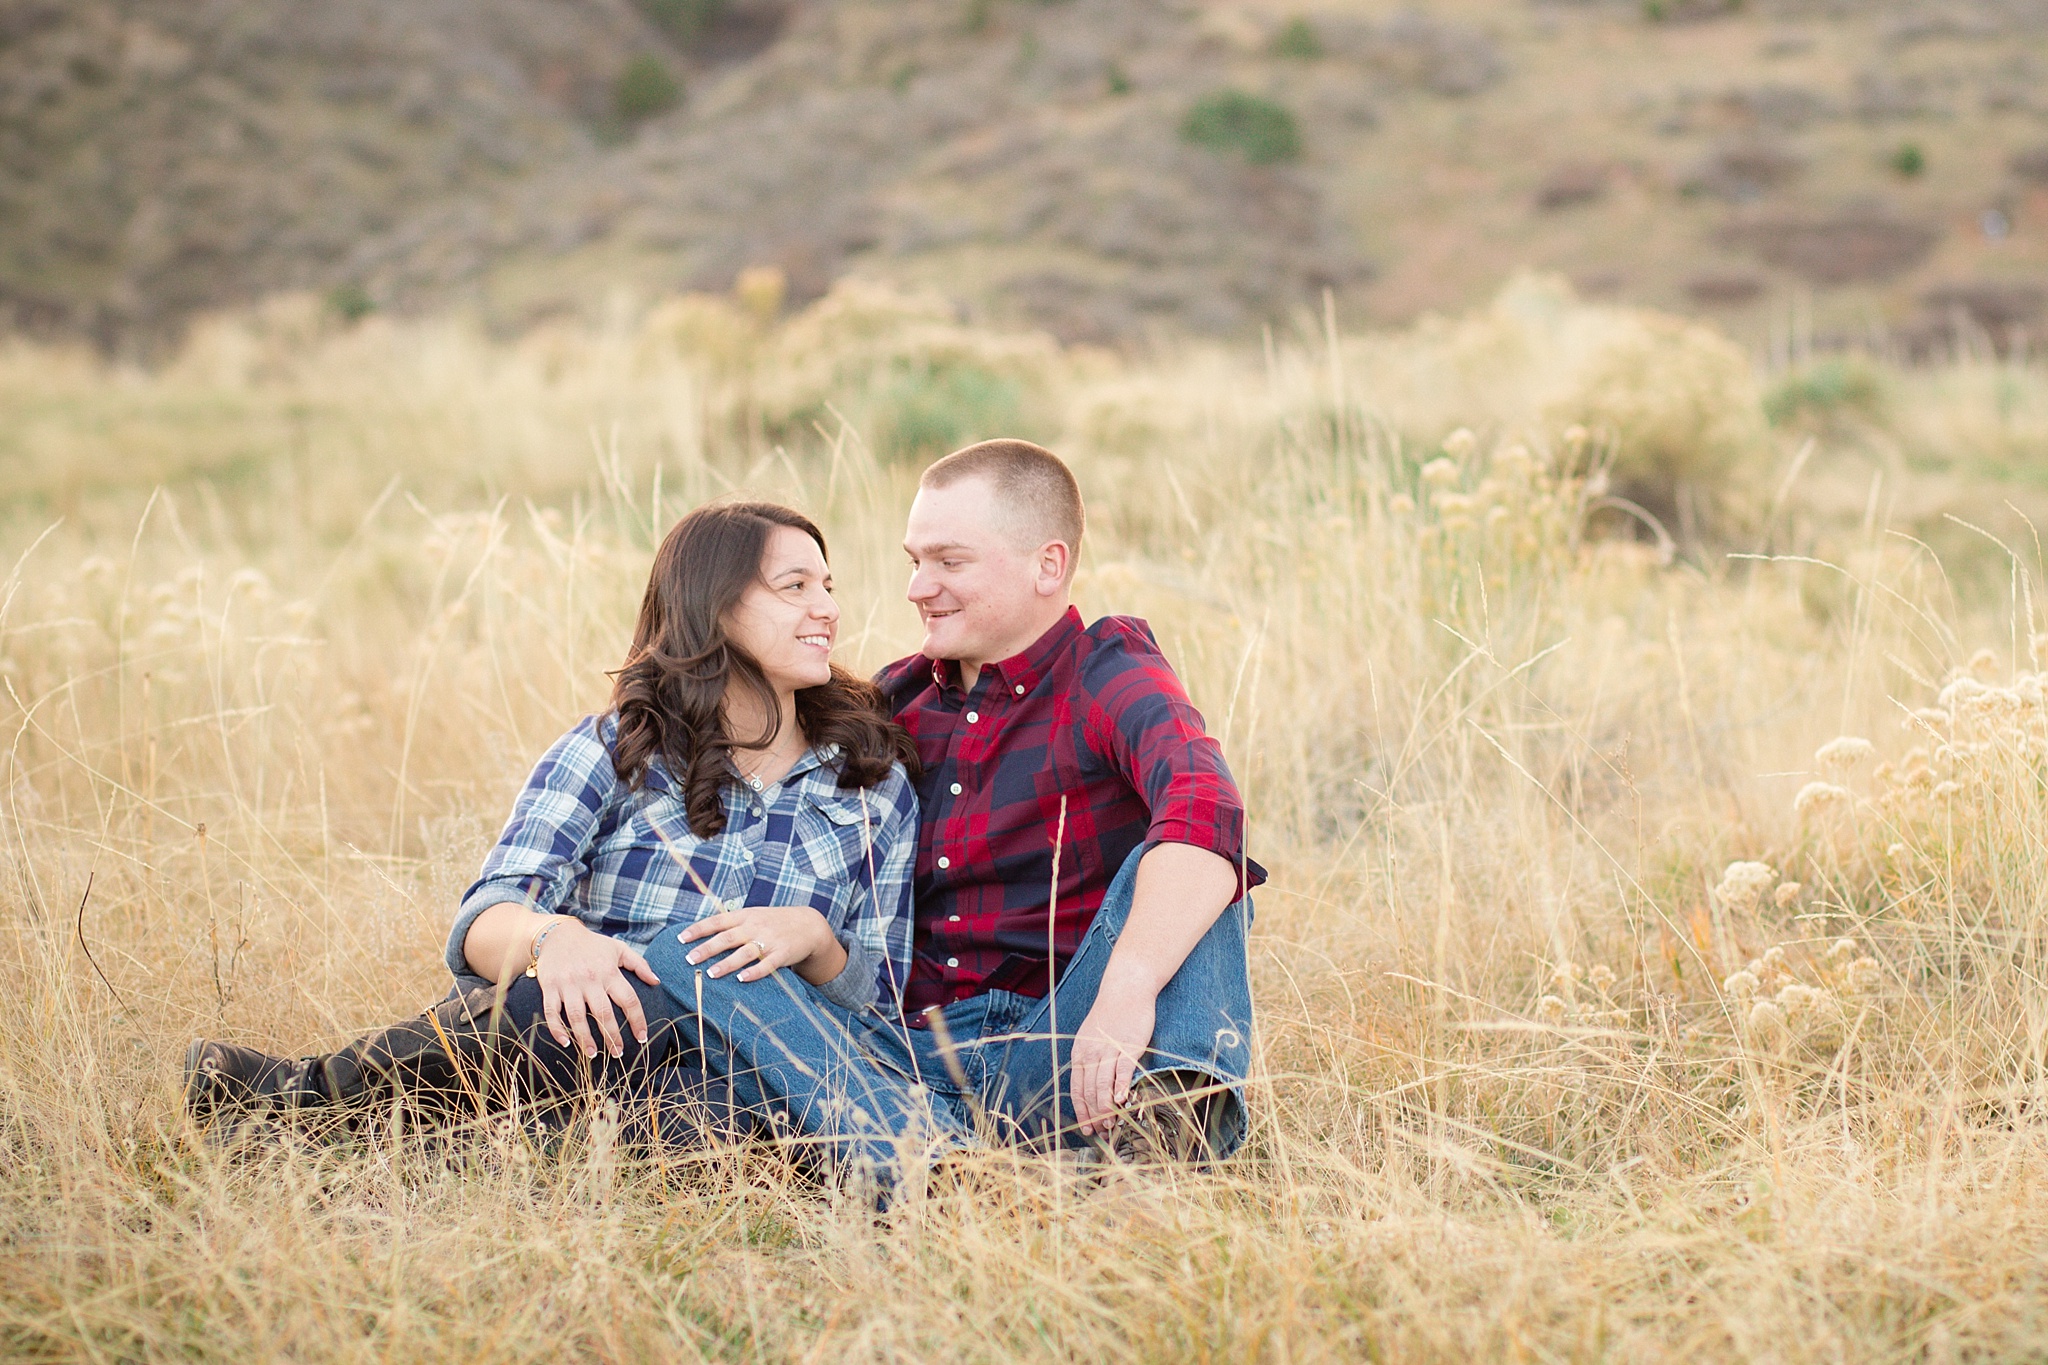 Tania & Chris' Mt. Falcon Engagement Session by Jennifer Garza Photography, Mt. Falcon Engagement Session, Mt. Falcon Engagement Photos, Morrison Engagement Photos, Red Rocks Engagement Photos, Colorado Engagement Photos, Colorado Engagement, Rocky Mountain Bride